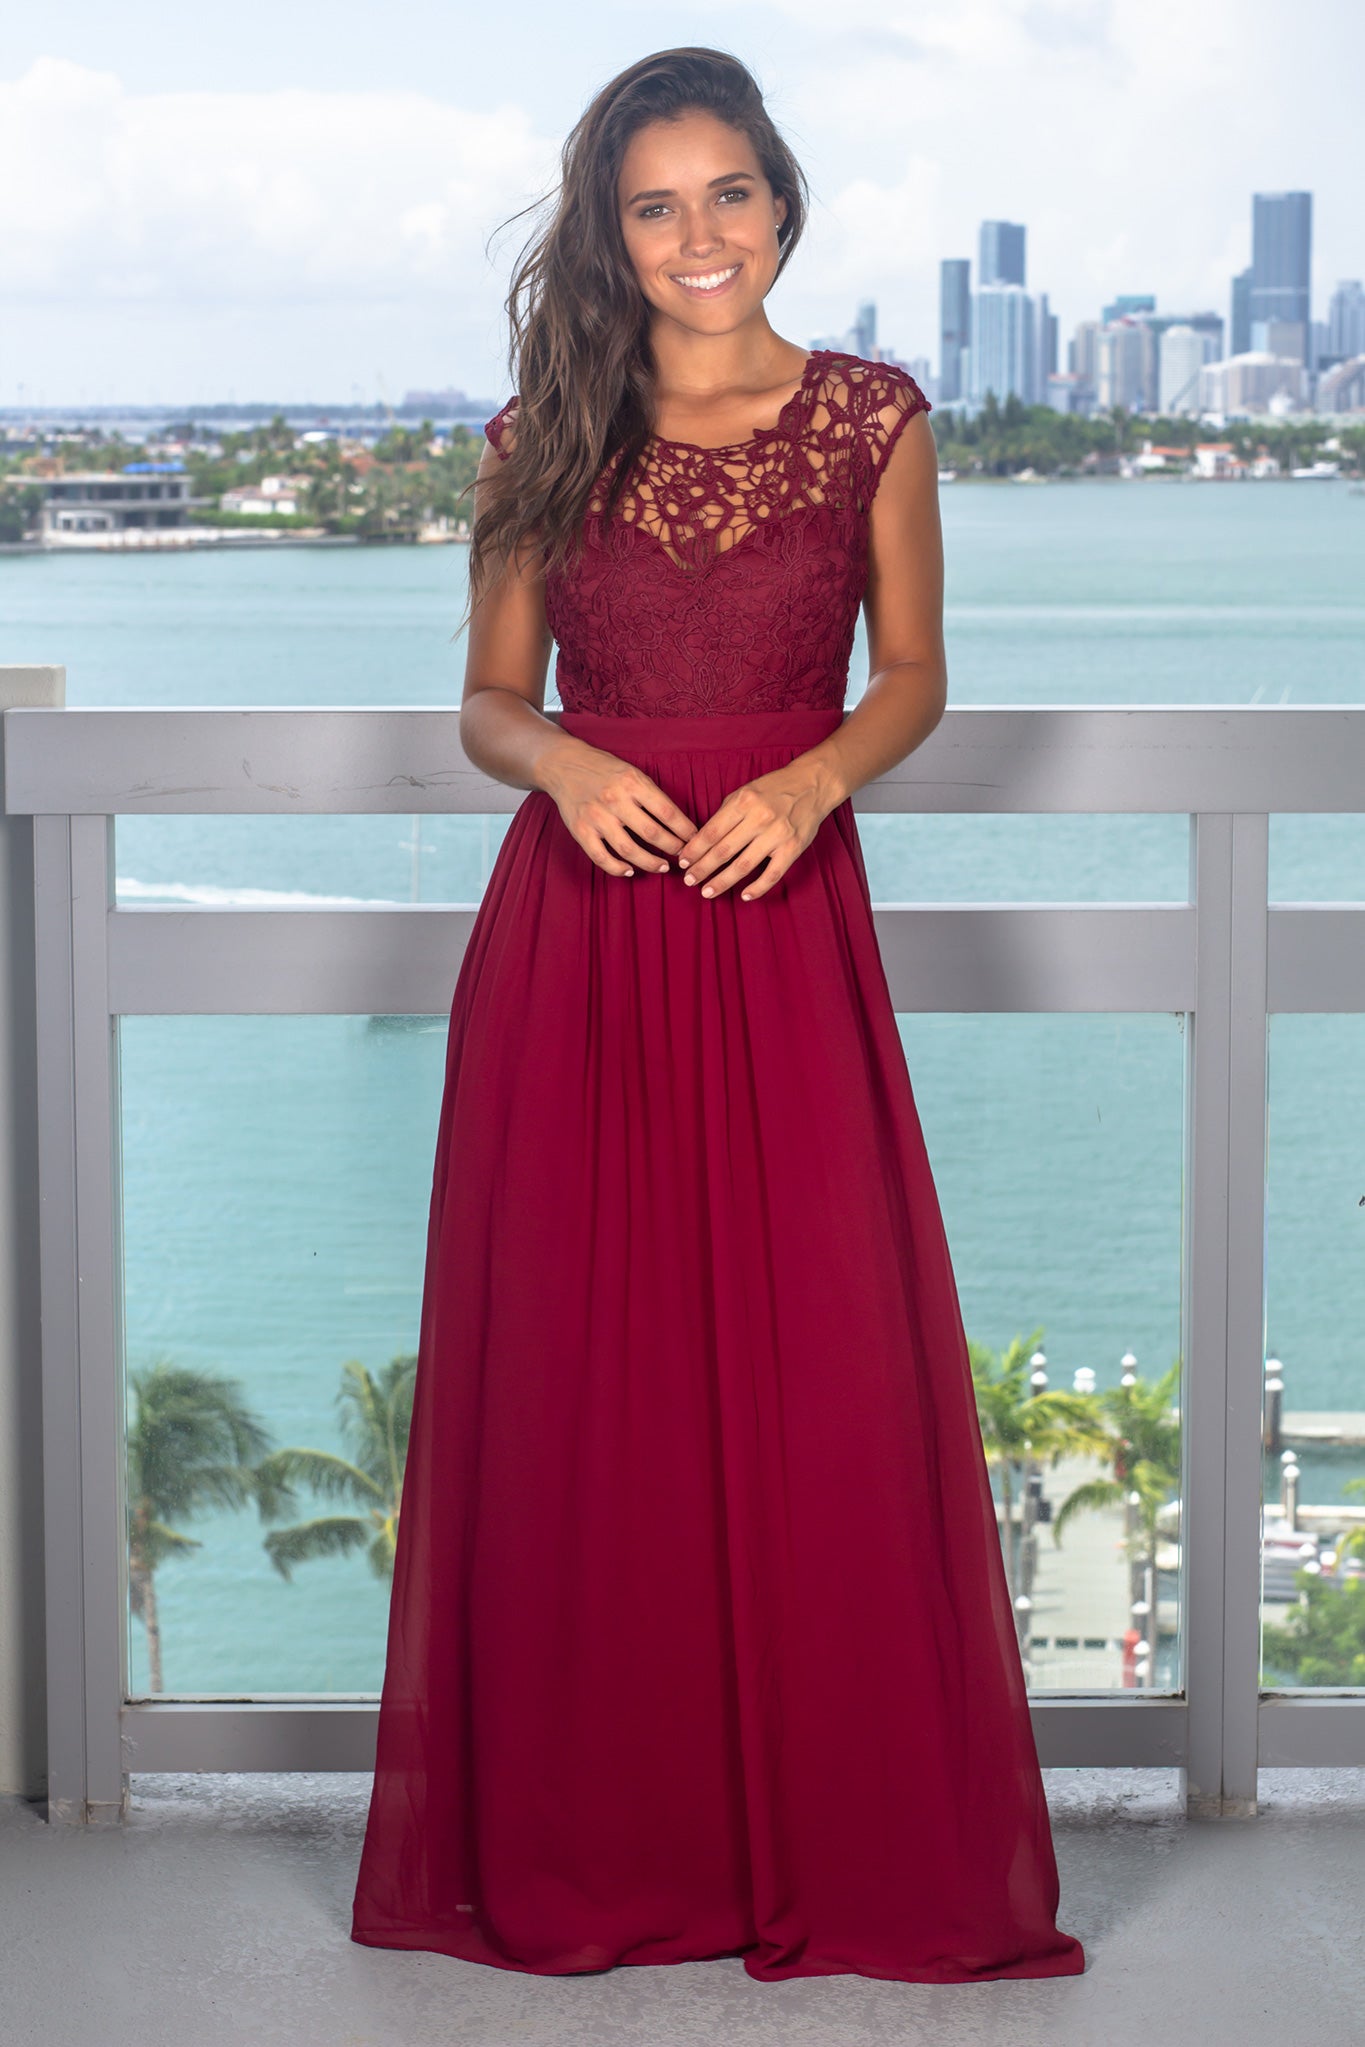 Burgundy Crochet Maxi Dress with Tulle Back | Maxi Dresses – Saved by ...